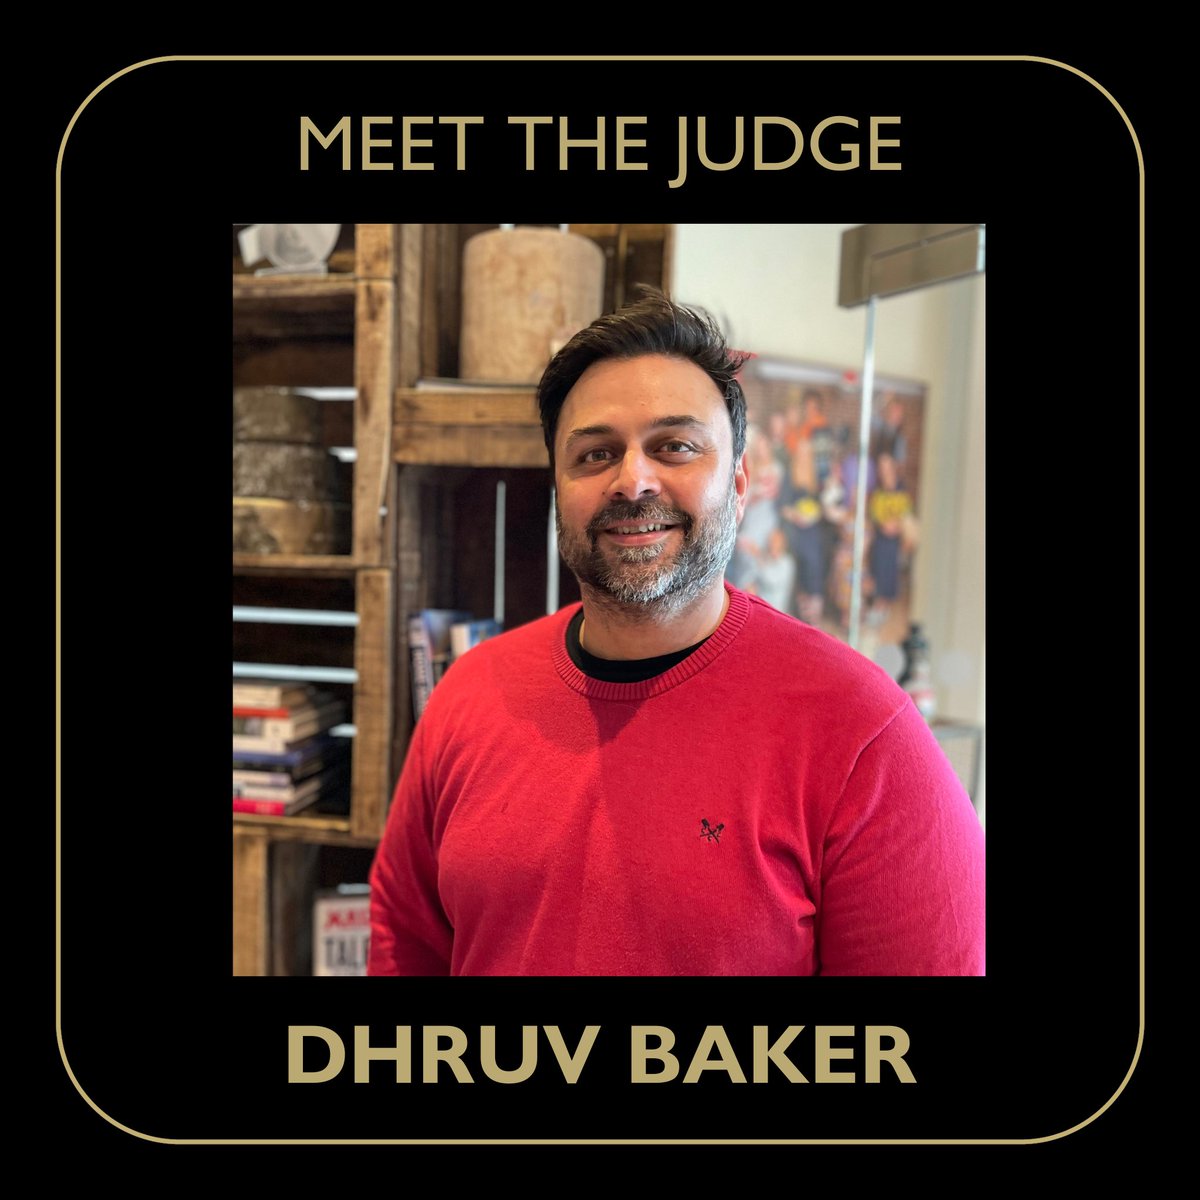 🌟 MEET THE JUDGES 🌟 Since winning MasterChef in 2010, @DhruvBaker1 has worked as a chef, writer, presenter and is now a master charcutier. Dhruv has judged at the World Cheese Awards since 2016 and does tasting events with the Academy of Cheese. #GreatTasteAwards